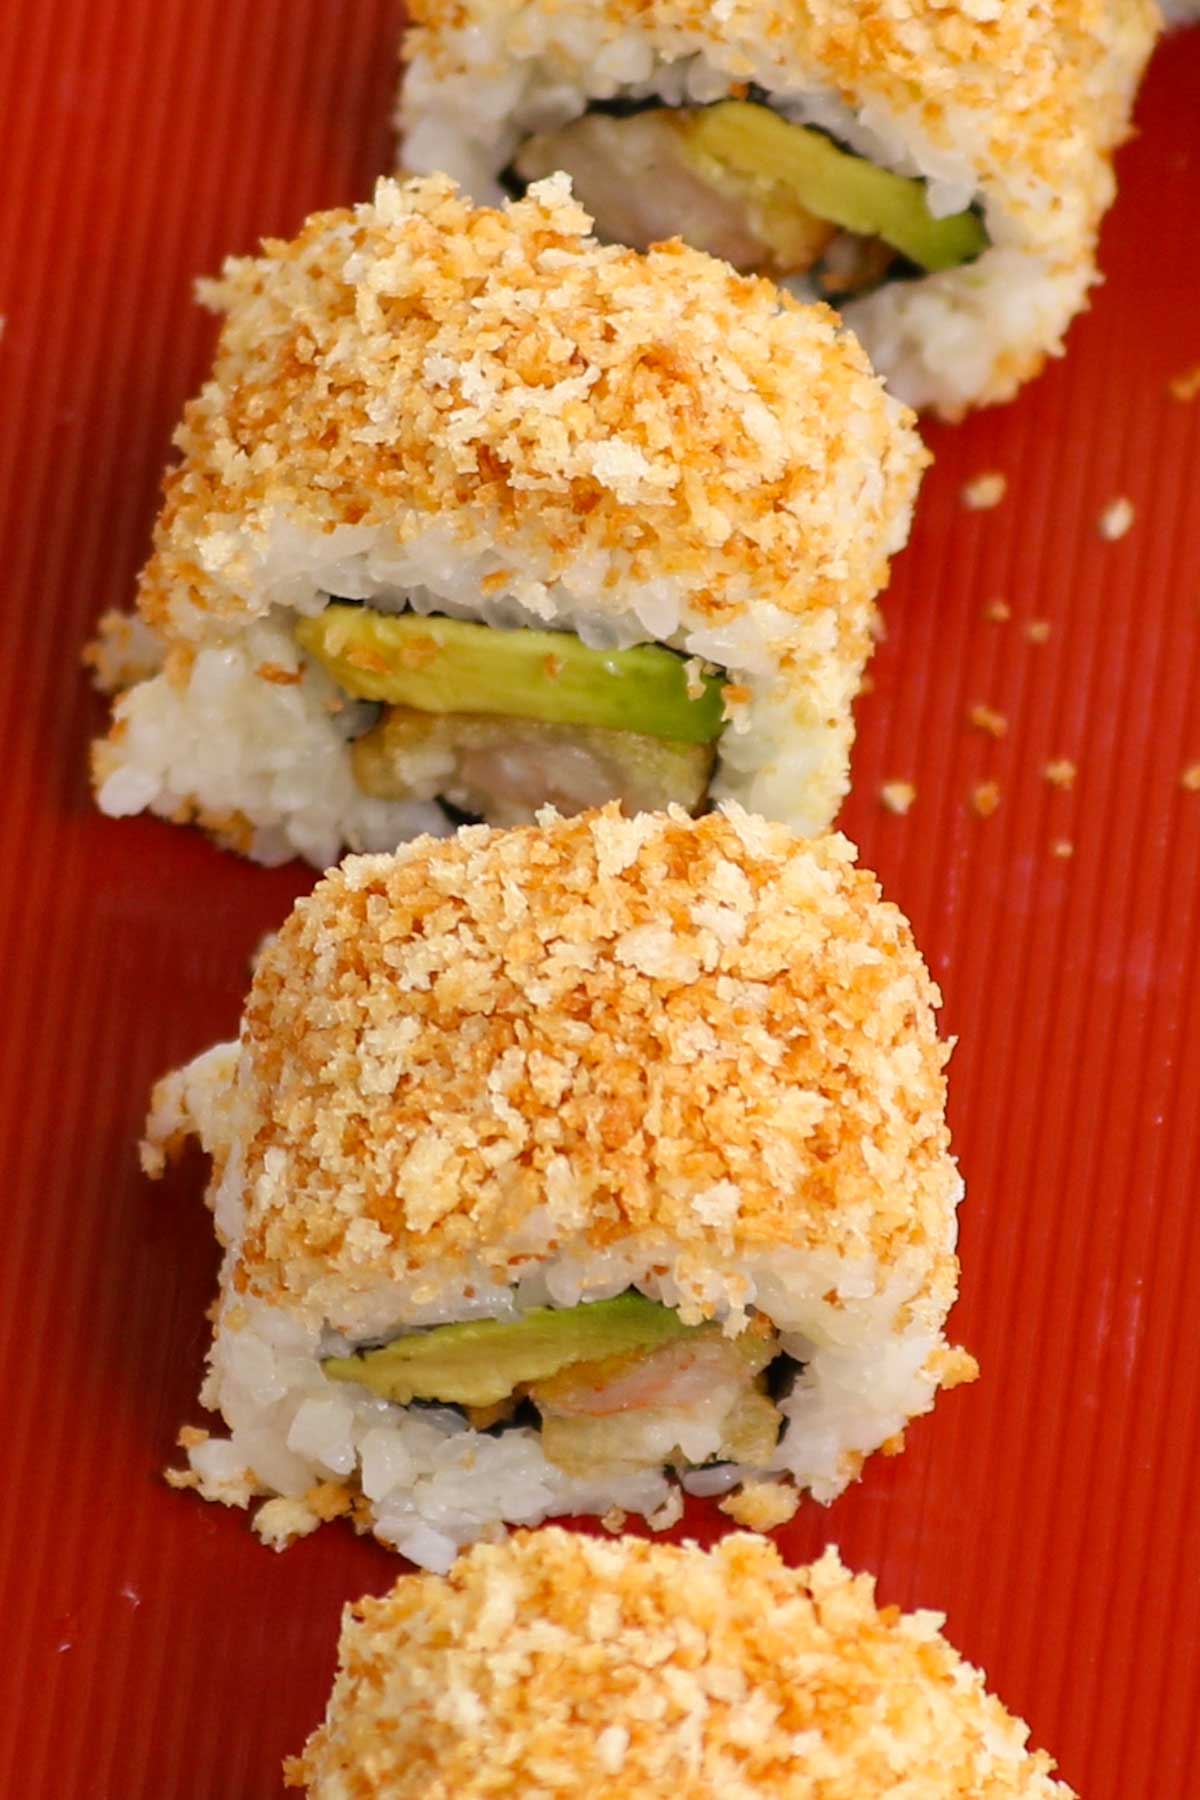 Crunchy Roll Sushi is a delicious variation of the popular California Roll. This crunchy roll features shrimp tempura filling and a crispy topping of toasted panko breadcrumbs. The flavor and texture are out of this world! This recipe is easy to make at home, rivaling the one from your favorite Japanese restaurant.